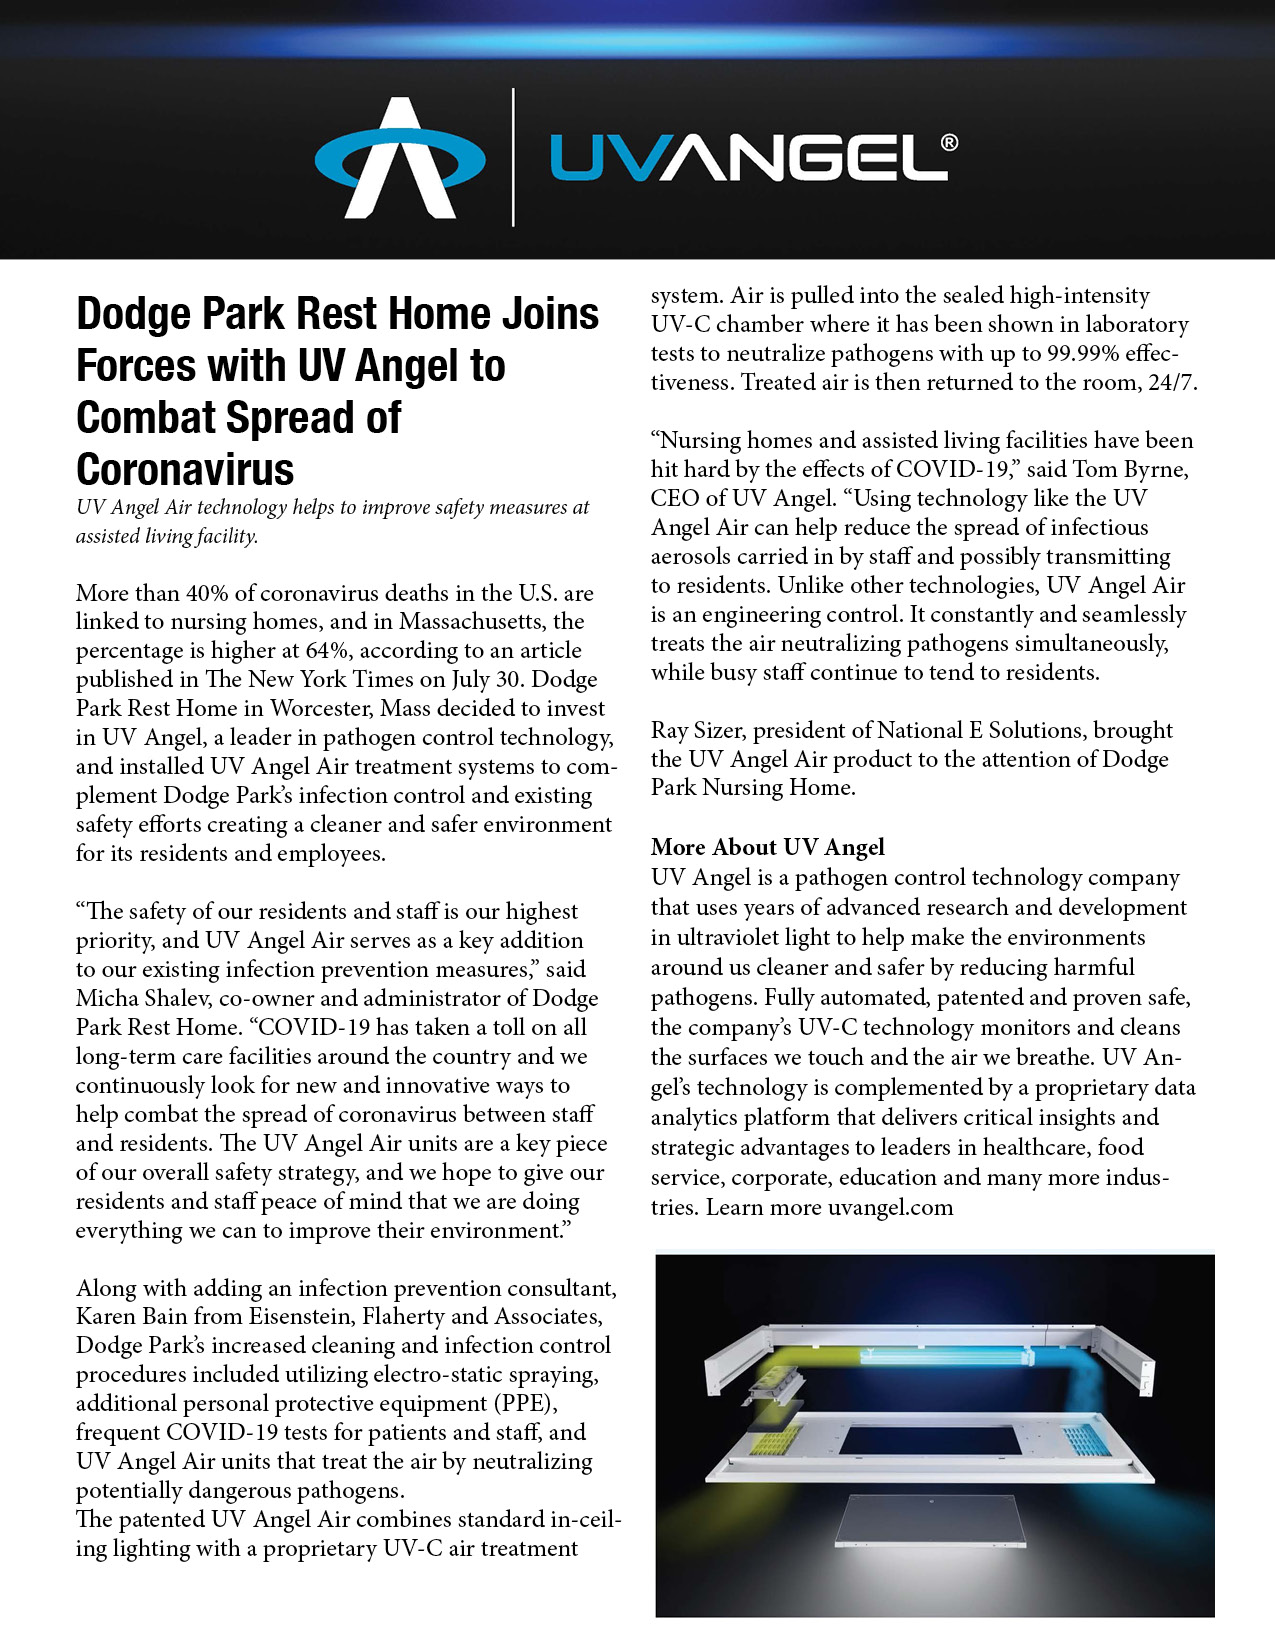 Dodge Park Rest Home Joins 
Forces with UV Angel to 

Combat Spread of 

Coronavirus

UV Angel Air technology helps to improve safety measures at 
assisted living facility.

More than 40% of coronavirus deaths in the U.S. are 
linked to nursing homes, and in Massachusetts, the 
percentage is higher at 64%, according to an article 
published in The New York Times on July 30. Dodge 
Park Rest Home in Worcester, Mass decided to invest 
in UV Angel, a leader in pathogen control technology, 
and installed UV Angel Air treatment systems to complement 
Dodge Park’s infection control and existing 
safety efforts creating a cleaner and safer environment 
for its residents and employees.

“The safety of our residents and staff is our highest 
priority, and UV Angel Air serves as a key addition 
to our existing infection prevention measures,” said 
Micha Shalev, co-owner and administrator of Dodge 
Park Rest Home. “COVID-19 has taken a toll on all 
long-term care facilities around the country and we 
continuously look for new and innovative ways to 
help combat the spread of coronavirus between staff 
and residents. The UV Angel Air units are a key piece 
of our overall safety strategy, and we hope to give our 
residents and staff peace of mind that we are doing 
everything we can to improve their environment.”

Along with adding an infection prevention consultant, 
Karen Bain from Eisenstein, Flaherty and Associates,

Dodge Park’s increased cleaning and infection control 
procedures included utilizing electro-static spraying,

additional personal protective equipment (PPE), 
frequent COVID-19 tests for patients and staff, and 
UV Angel Air units that treat the air by neutralizing 
potentially dangerous pathogens.

The patented UV Angel Air combines standard in-ceiling 
lighting with a proprietary UV-C air treatment

system. Air is pulled into the sealed high-intensity 
UV-C chamber where it has been shown in laboratory 
tests to neutralize pathogens with up to 99.99% effectiveness. 
Treated air is then returned to the room, 24/7.

“Nursing homes and assisted living facilities have been 
hit hard by the effects of COVID-19,” said Tom Byrne,

CEO of UV Angel. “Using technology like the UV 
Angel Air can help reduce the spread of infectious 
aerosols carried in by staff and possibly transmitting 
to residents. Unlike other technologies, UV Angel Air 
is an engineering control. It constantly and seamlessly 
treats the air neutralizing pathogens simultaneously, 
while busy staff continue to tend to residents.

Ray Sizer, president of National E Solutions, brought 
the UV Angel Air product to the attention of Dodge 
Park Nursing Home.

More About UV Angel

UV Angel is a pathogen control technology company 
that uses years of advanced research and development

in ultraviolet light to help make the environments 
around us cleaner and safer by reducing harmful

pathogens. Fully automated, patented and proven safe, 
the company’s UV-C technology monitors and cleans

the surfaces we touch and the air we breathe. UV Angel’s 
technology is complemented by a proprietary data

analytics platform that delivers critical insights and 
strategic advantages to leaders in healthcare, food

service, corporate, education and many more industries. 
Learn more uvangel.com



